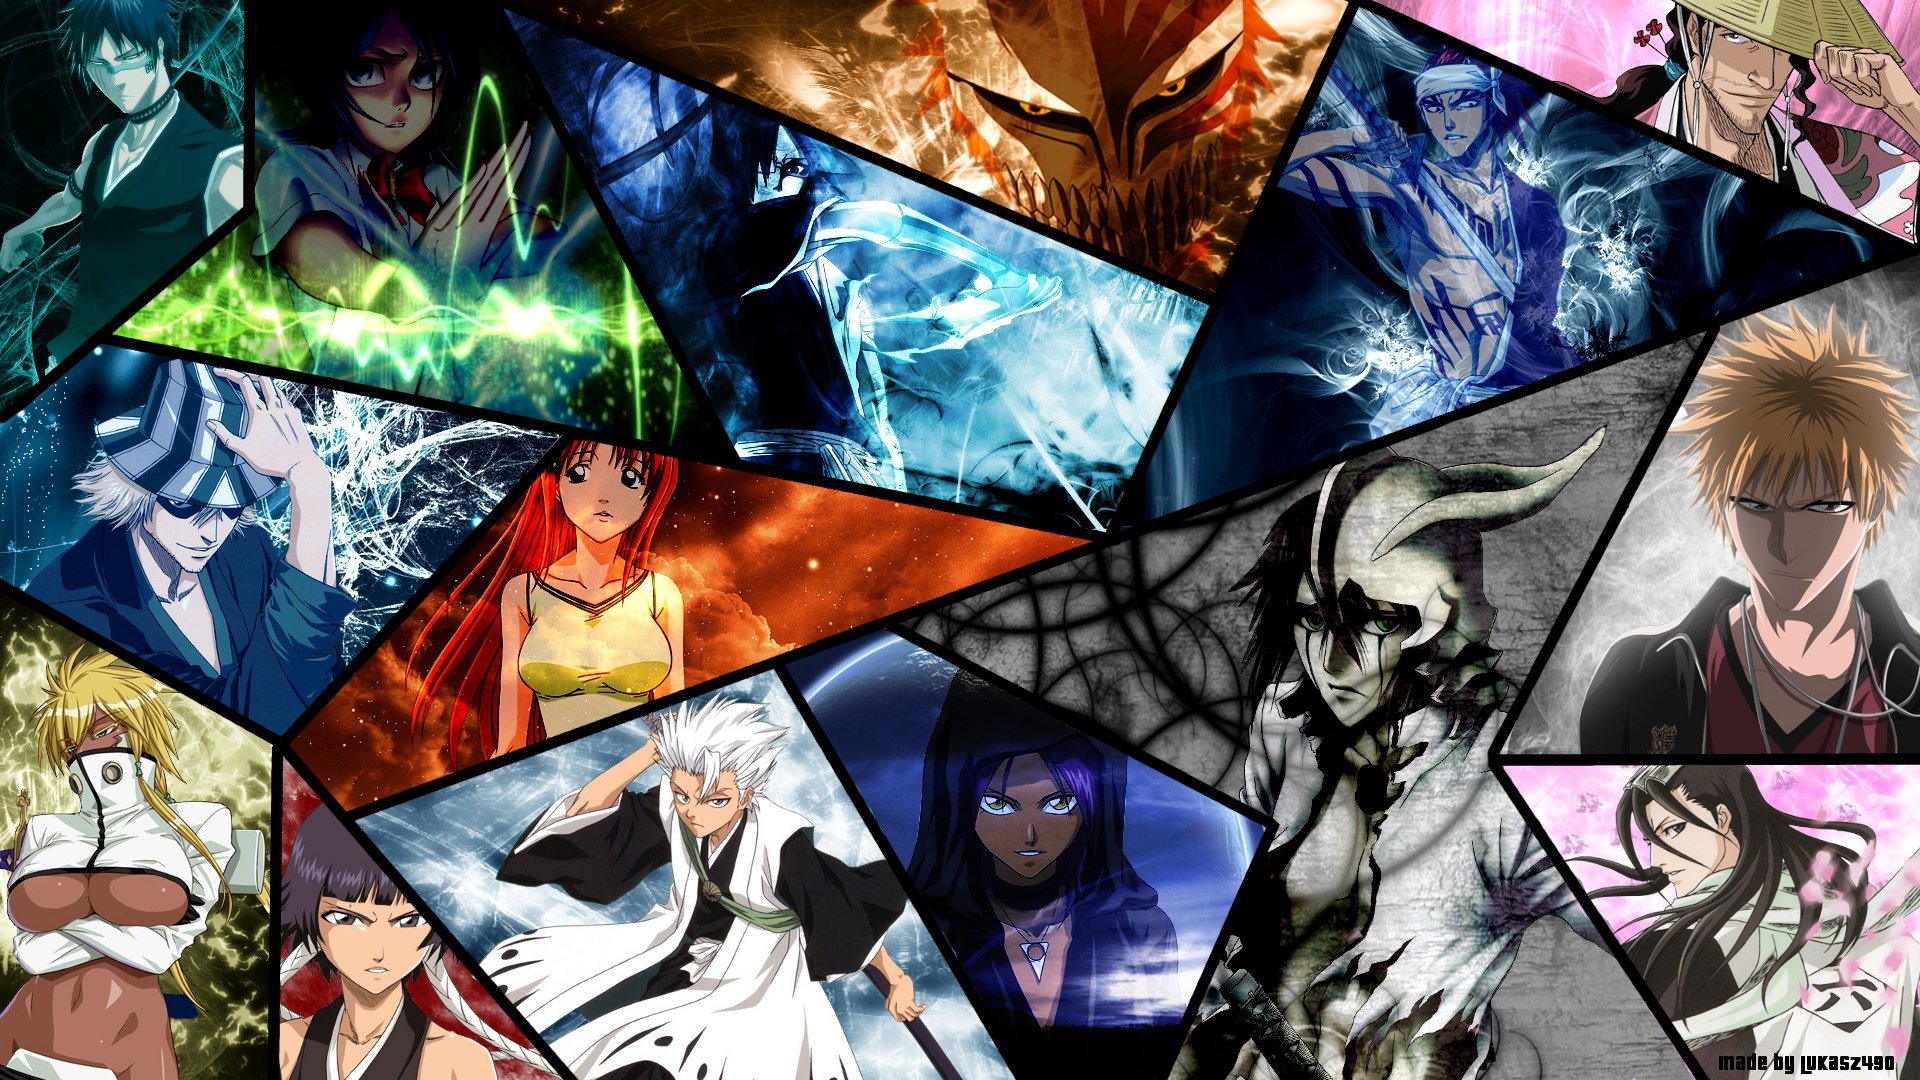 Free download Bleach Anime image BLEACH WALLPAPERS wallpaper photo 34292879 [1920x1080] for your Desktop, Mobile & Tablet. Explore All Anime Wallpaper. Anime Desktop Wallpaper, Free Anime Picture and Wallpaper, Anime Free Wallpaper